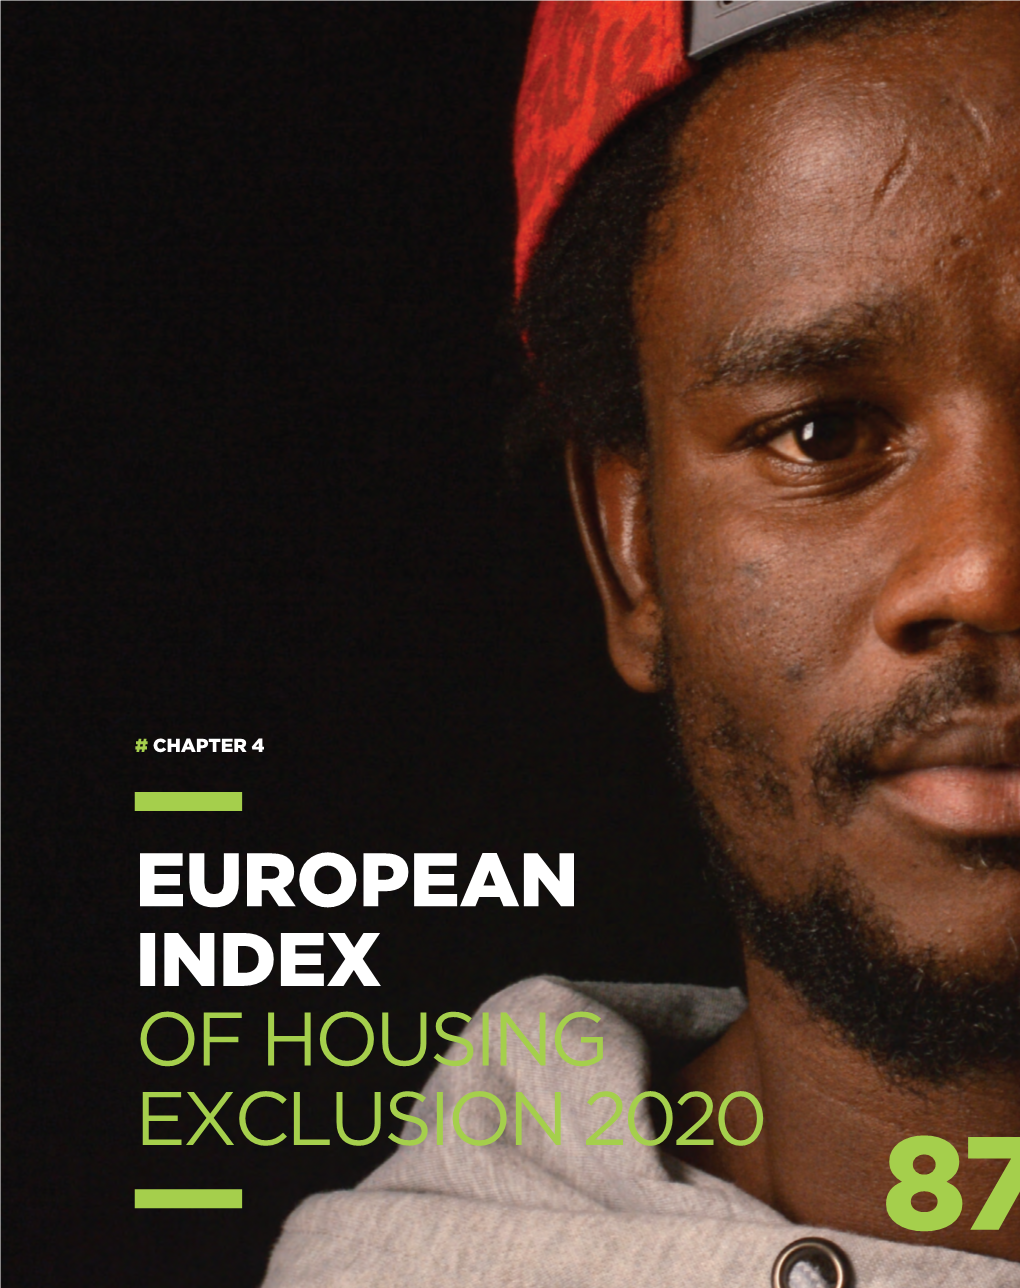 European Index of Housing Exclusion 2020 87 # Chapter 4 European Index of Housing Exclusion 2020 Summary of the Tables Presented